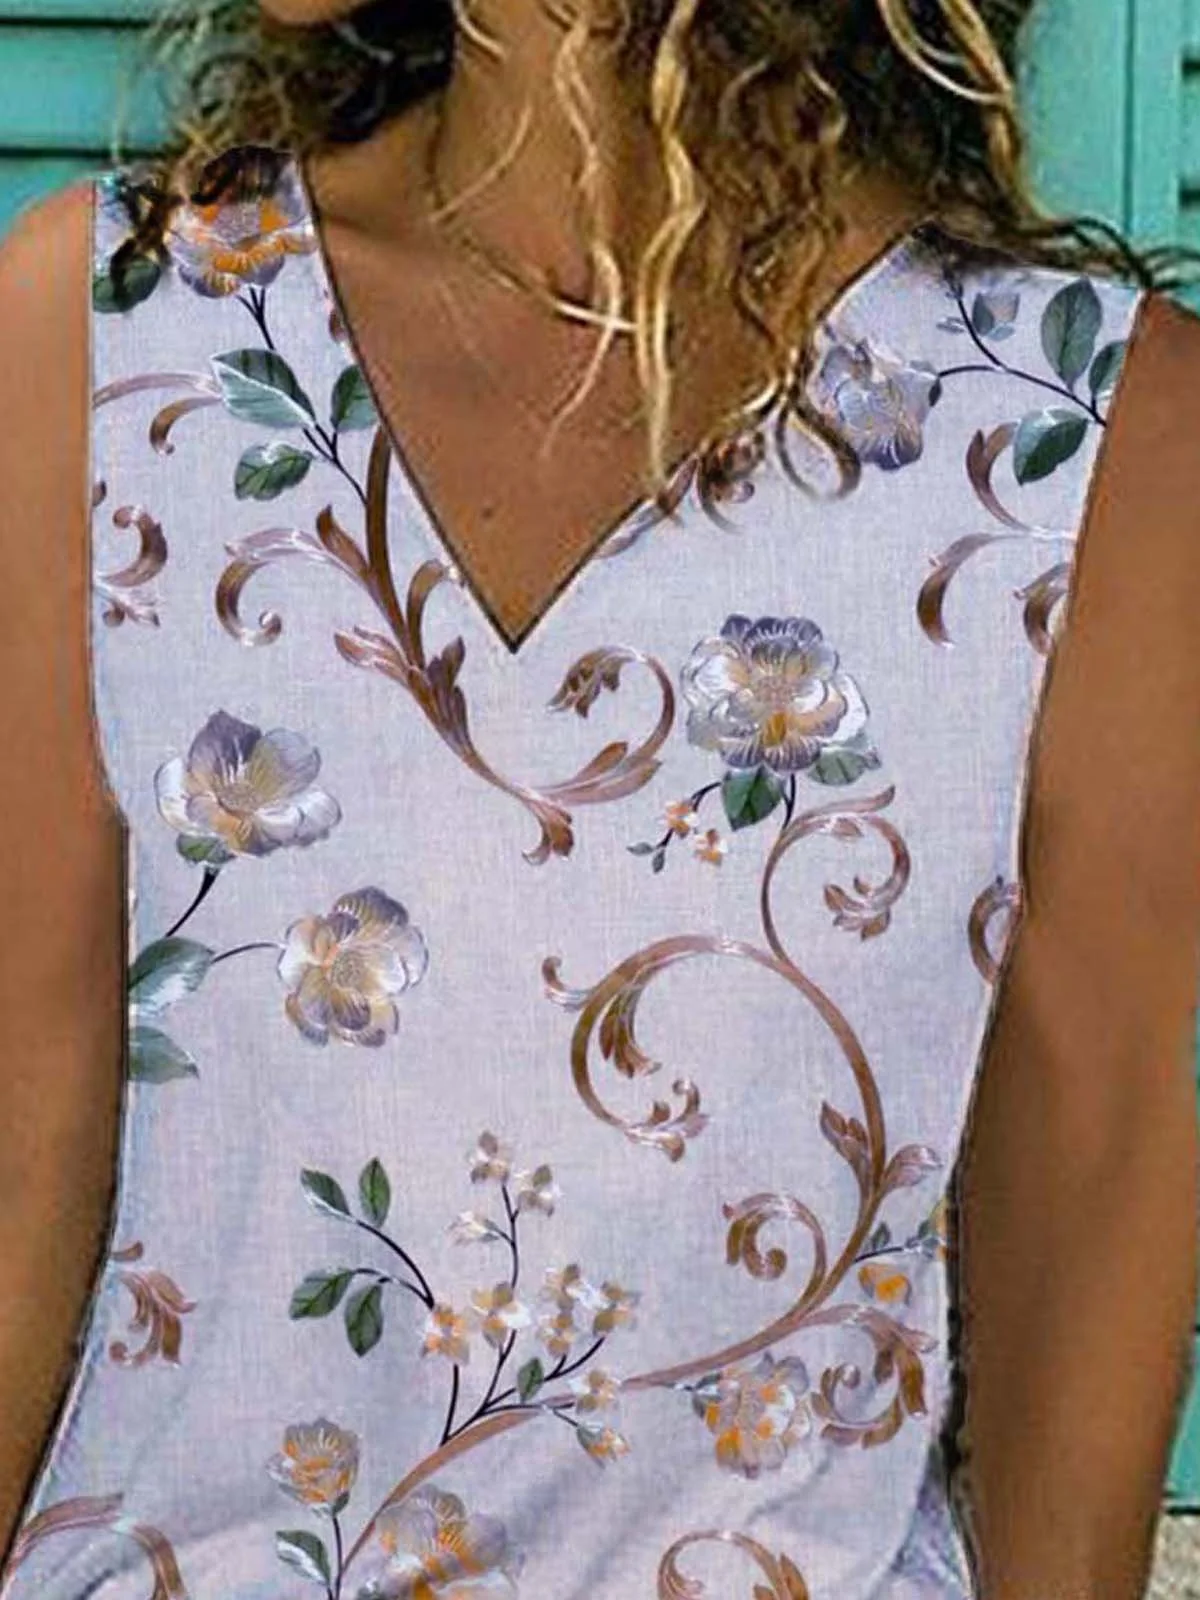 Floral  Sleeveless  Printed  Cotton-blend  V neck  Holiday Summer  White Top